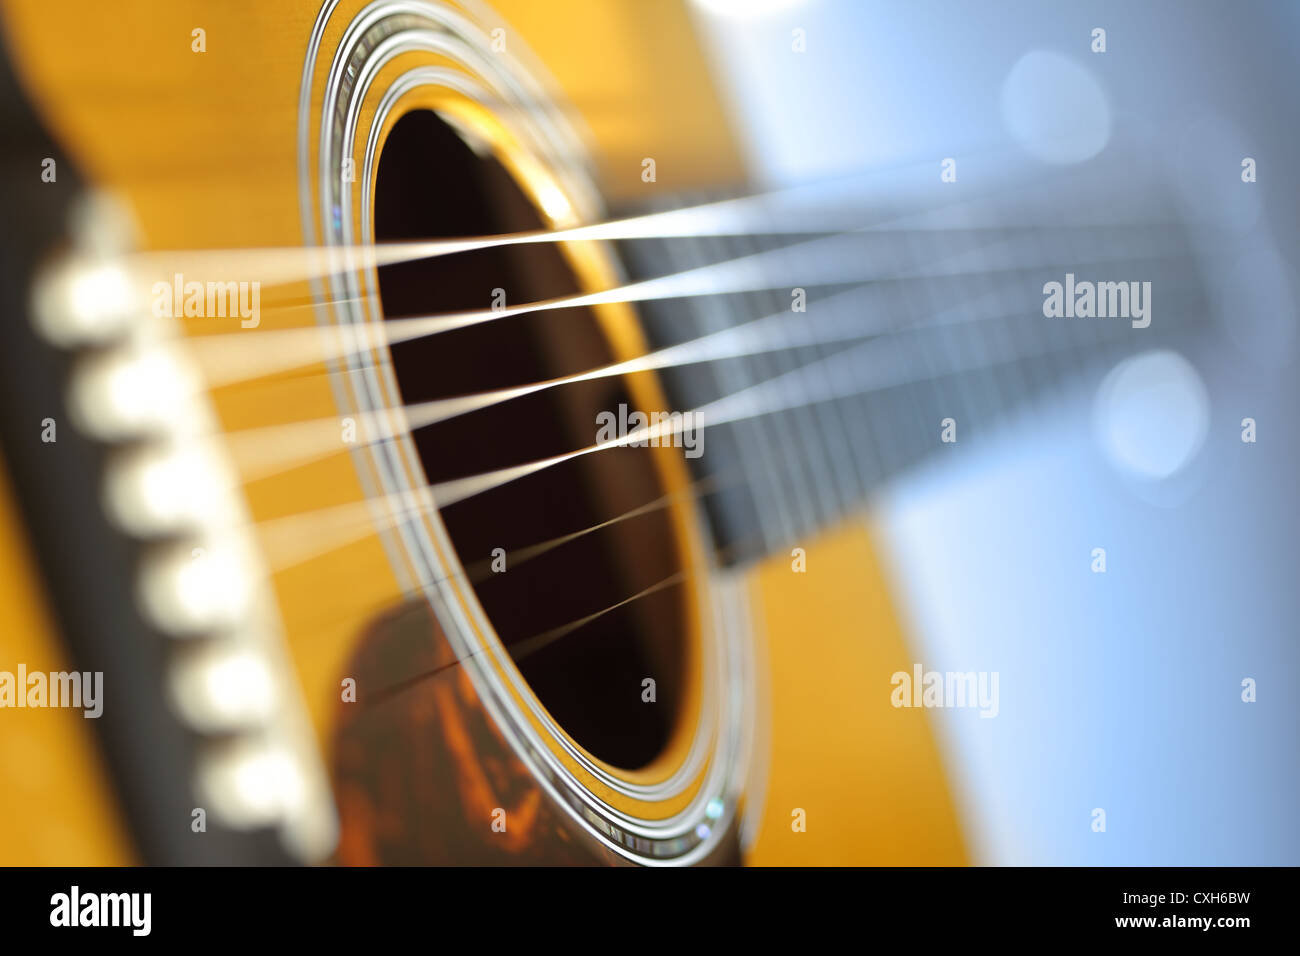 Acoustic guitar Stock Photo